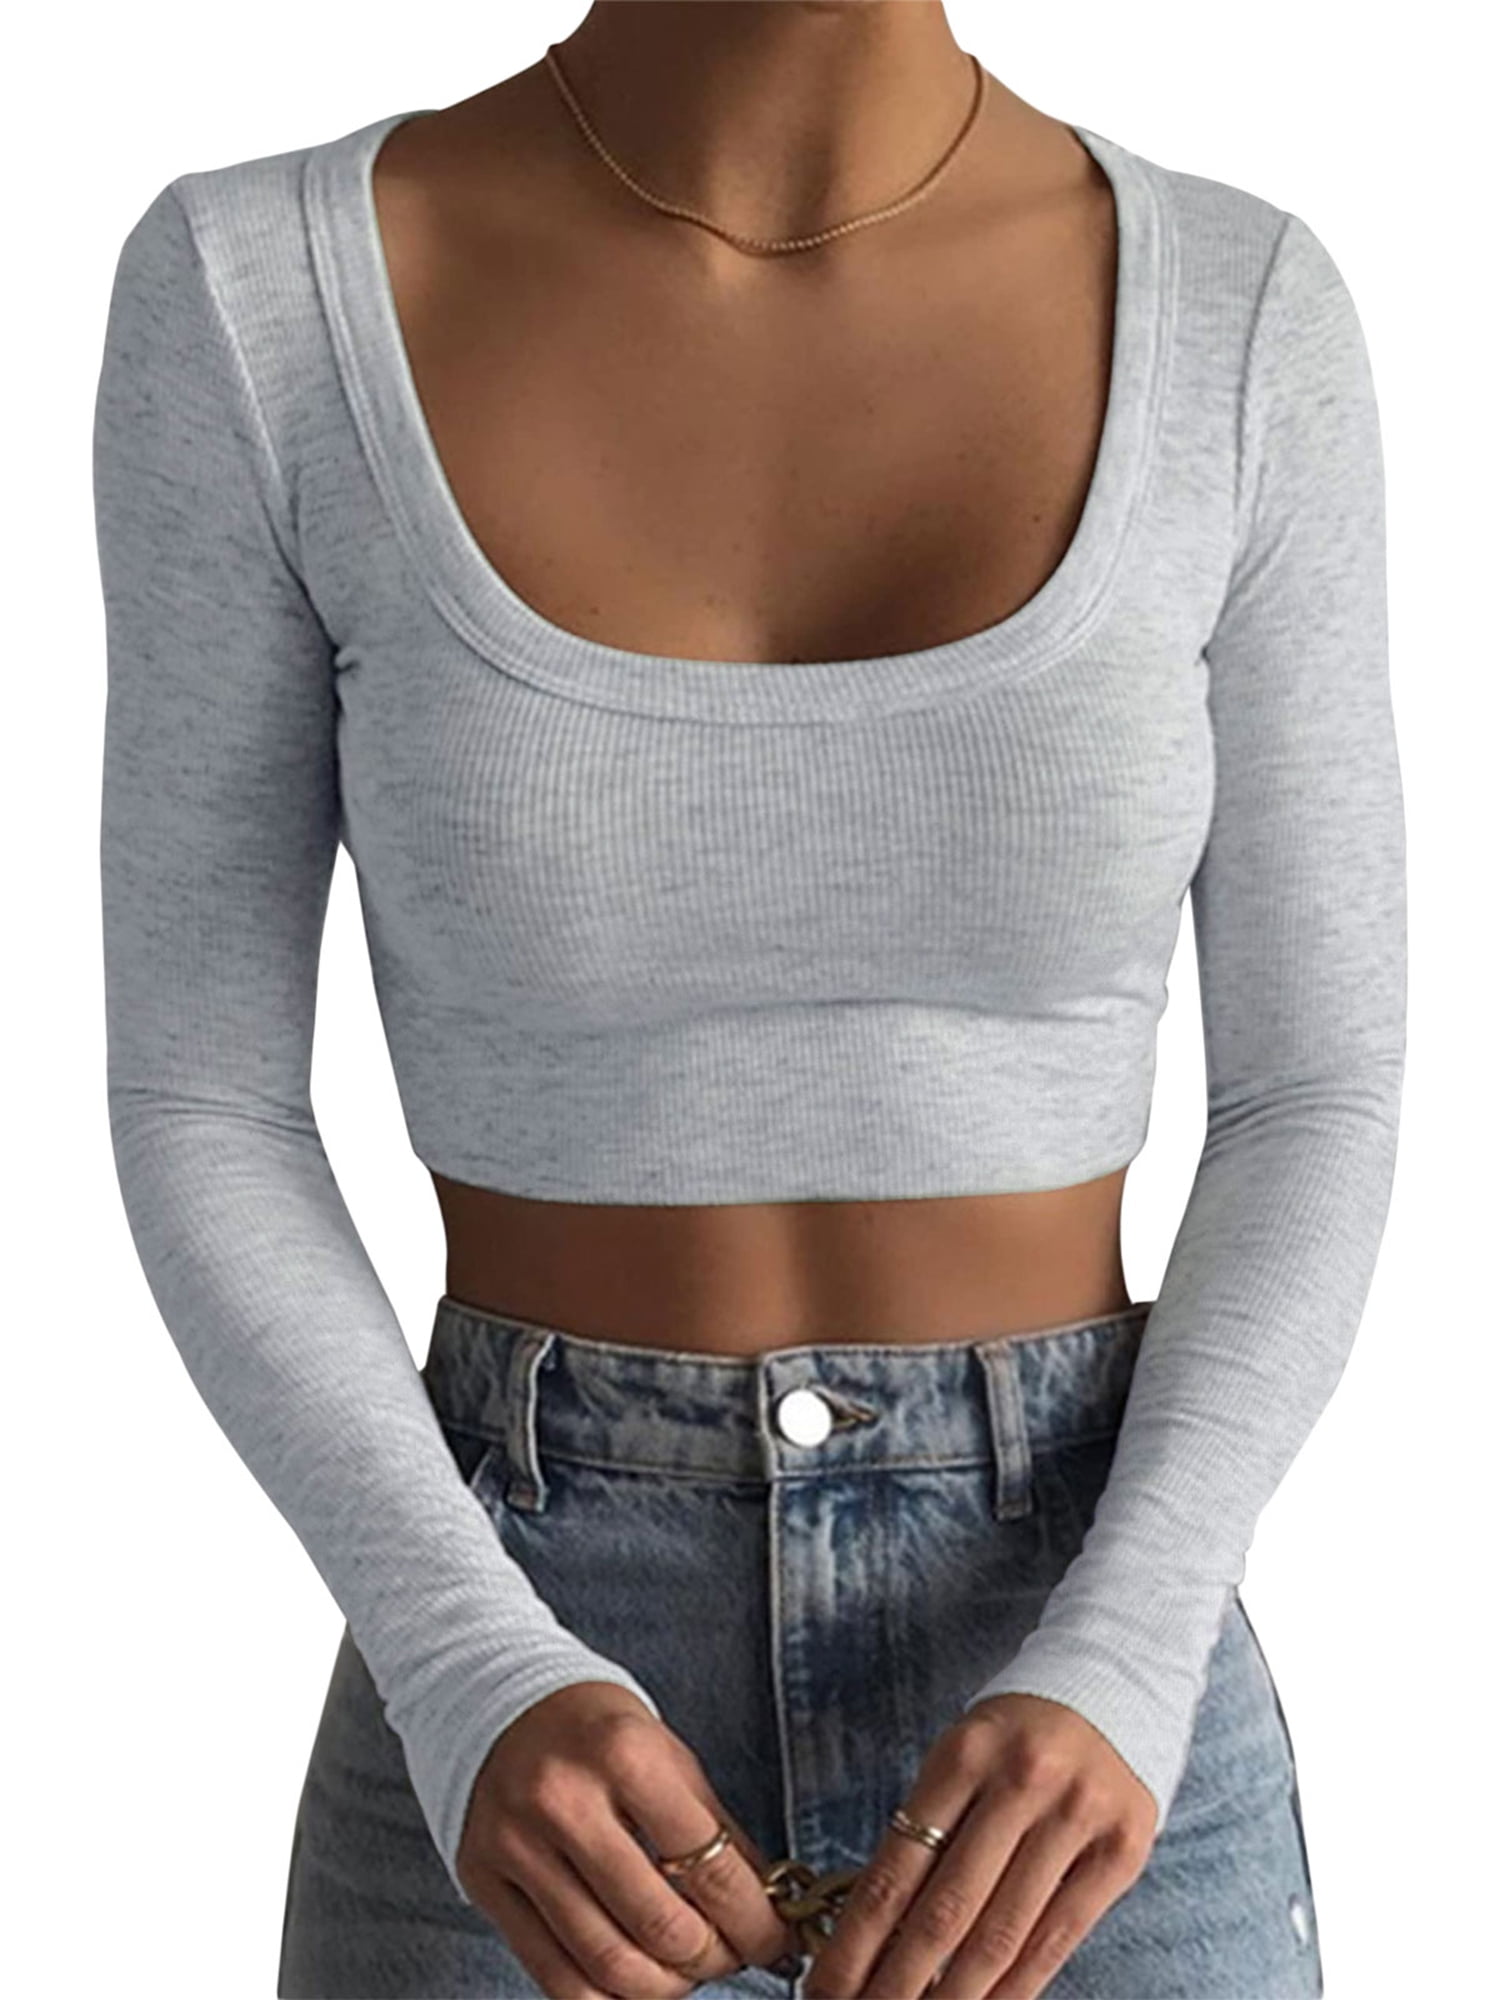 Women\'s Square Neck Long Sleeve Crop Top Ribbed Knit Slim Fit Bodycon  Skinny Cropped Tee Shirts Blouse Streetwear Light Grey